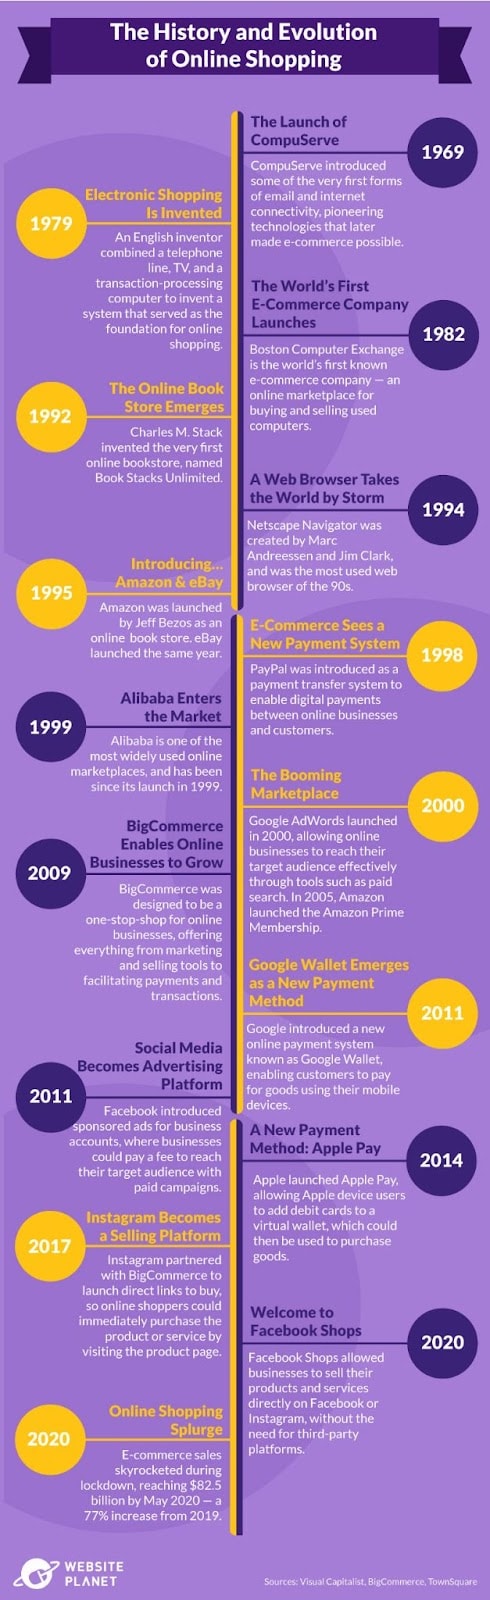 The History and Evolution of Online Shopping